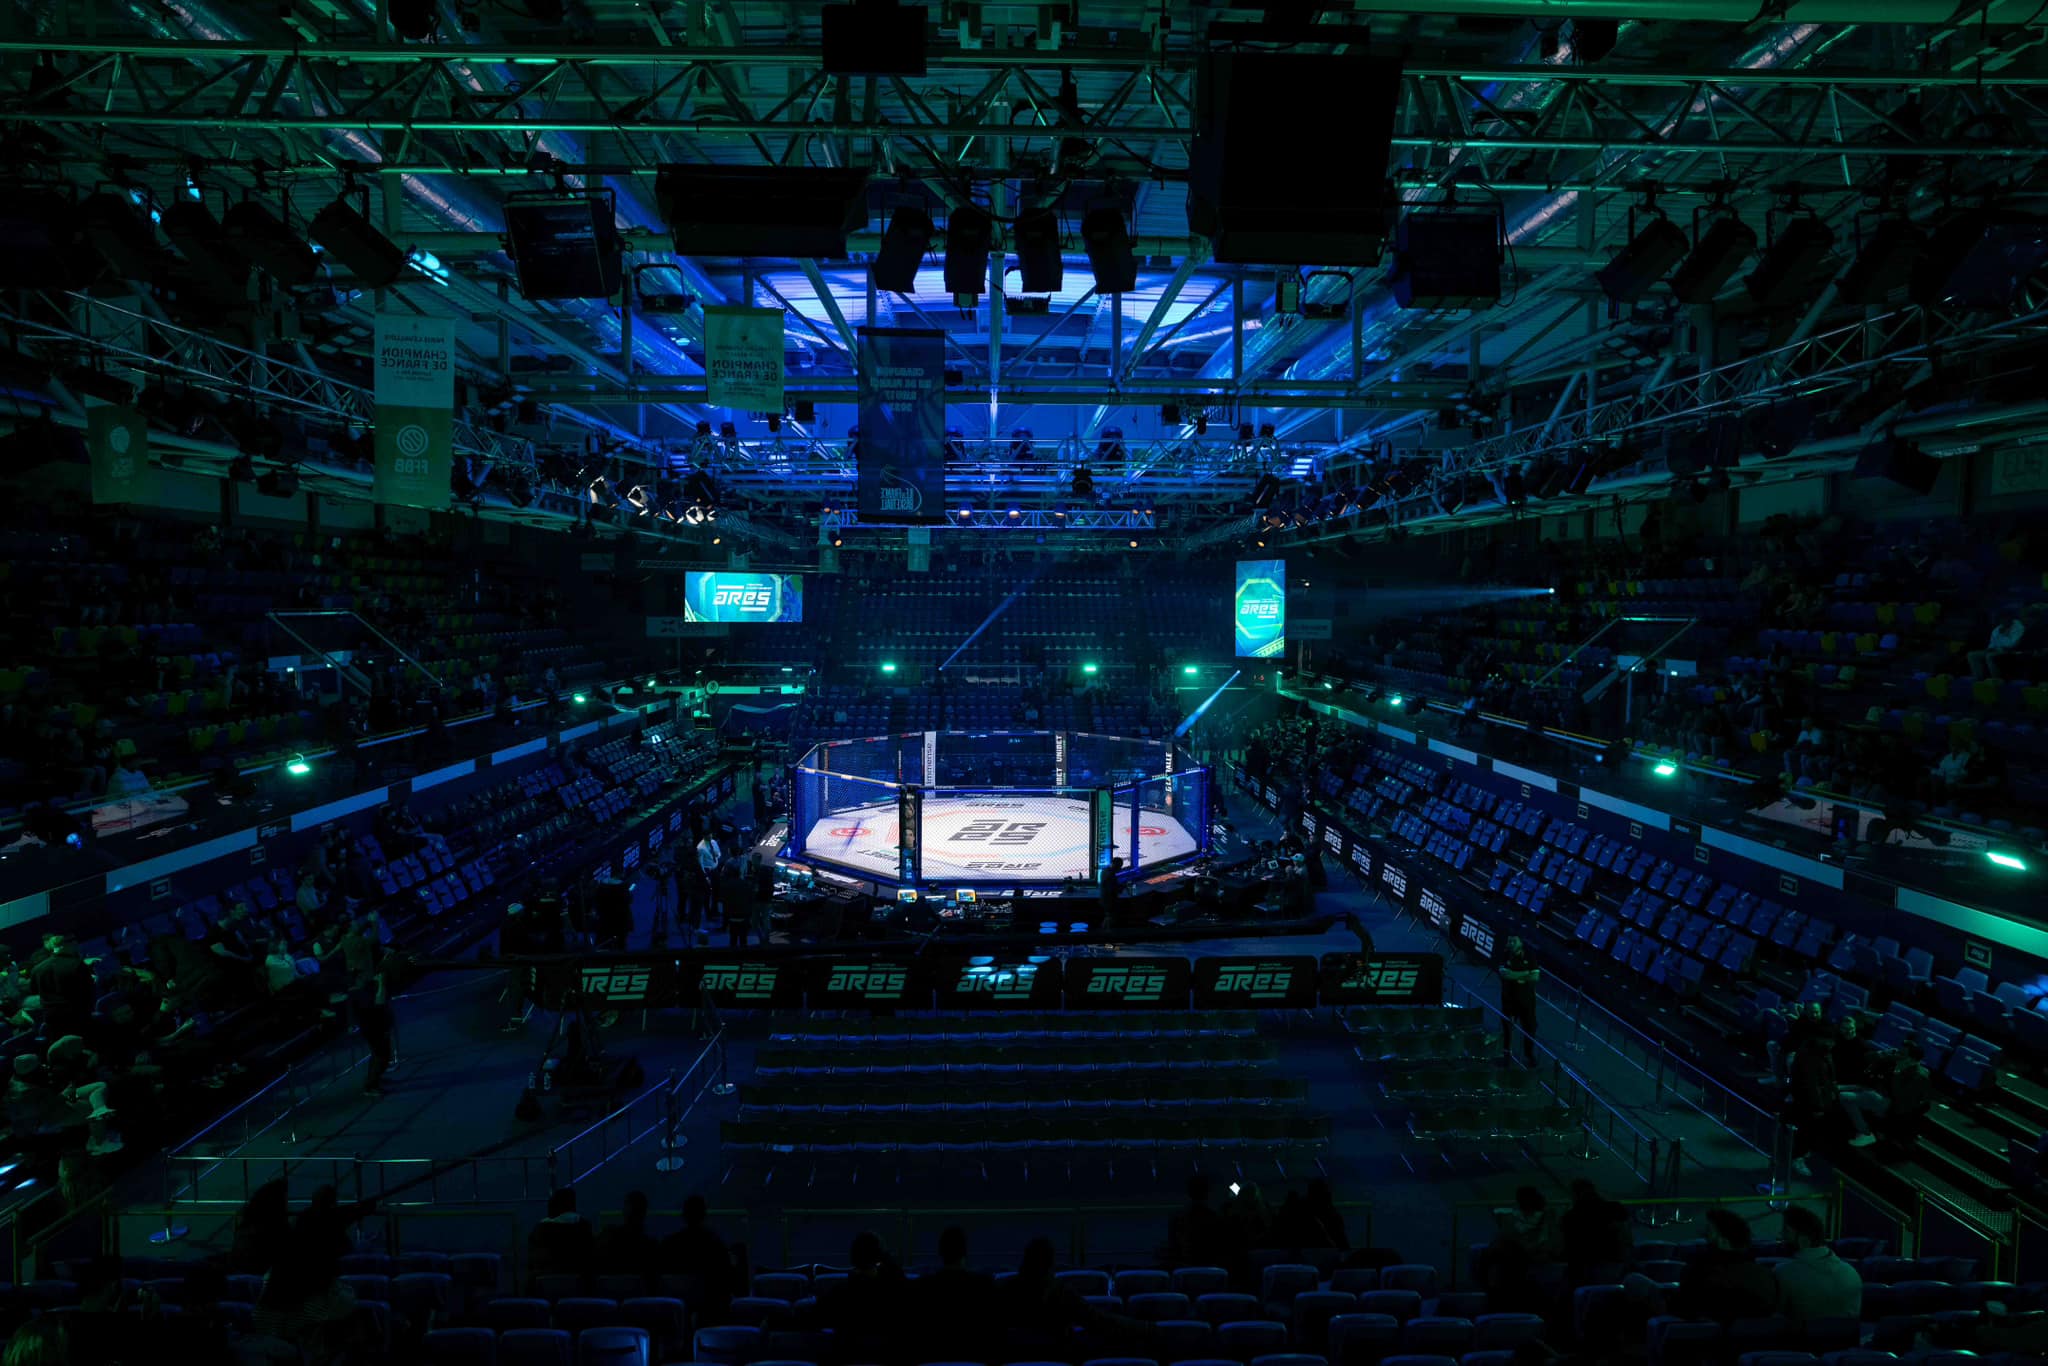 ARES FC 17: Aida vs. Younousov Fight Card, Start Times, Streams, Results